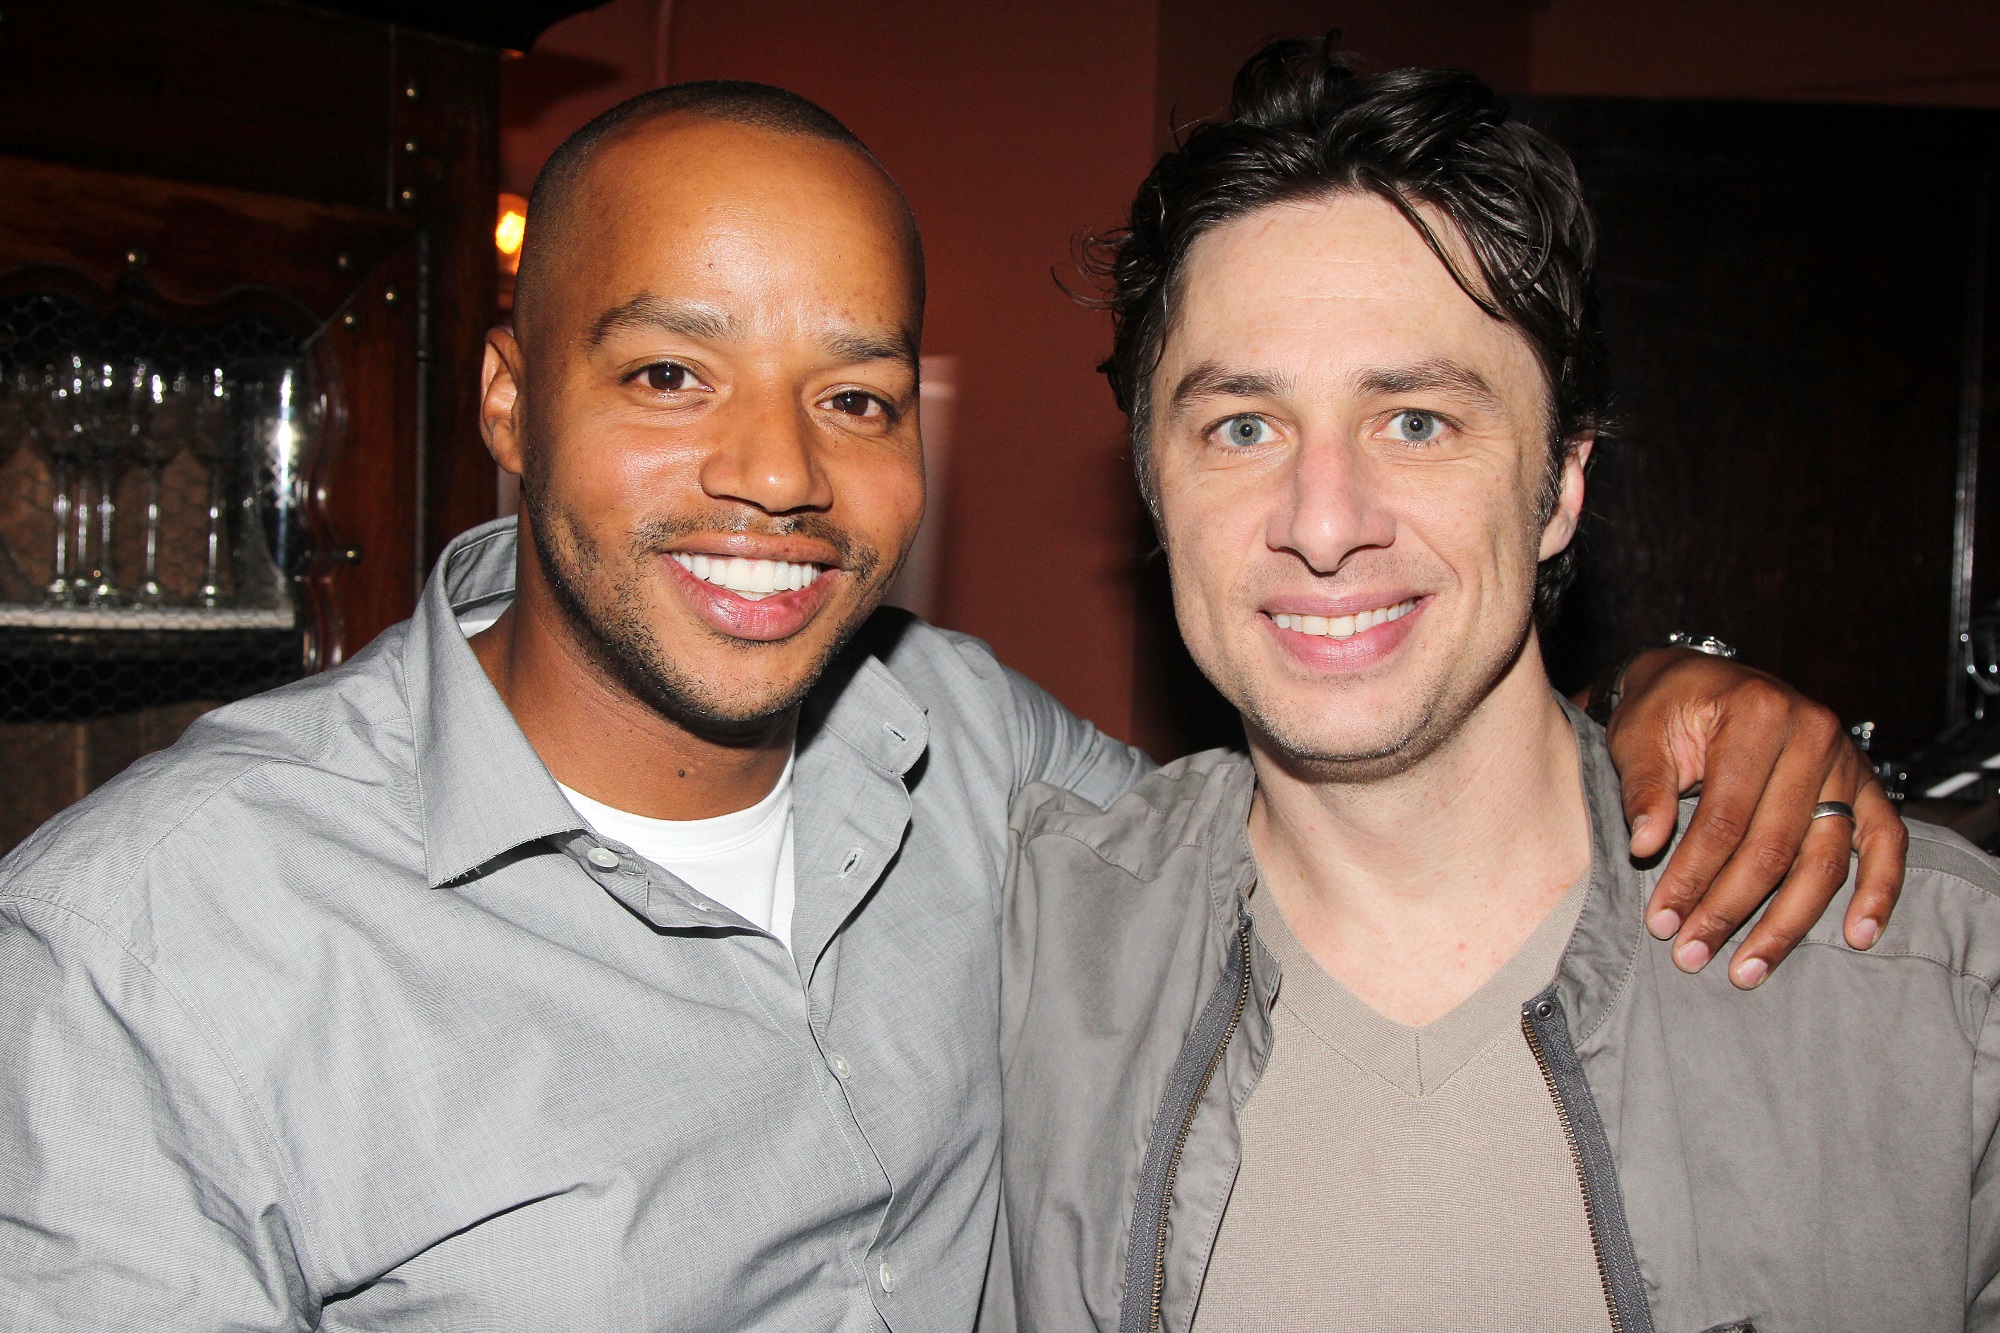 Donald Faison and Zach Braff on July 15, 2014, in New York City.